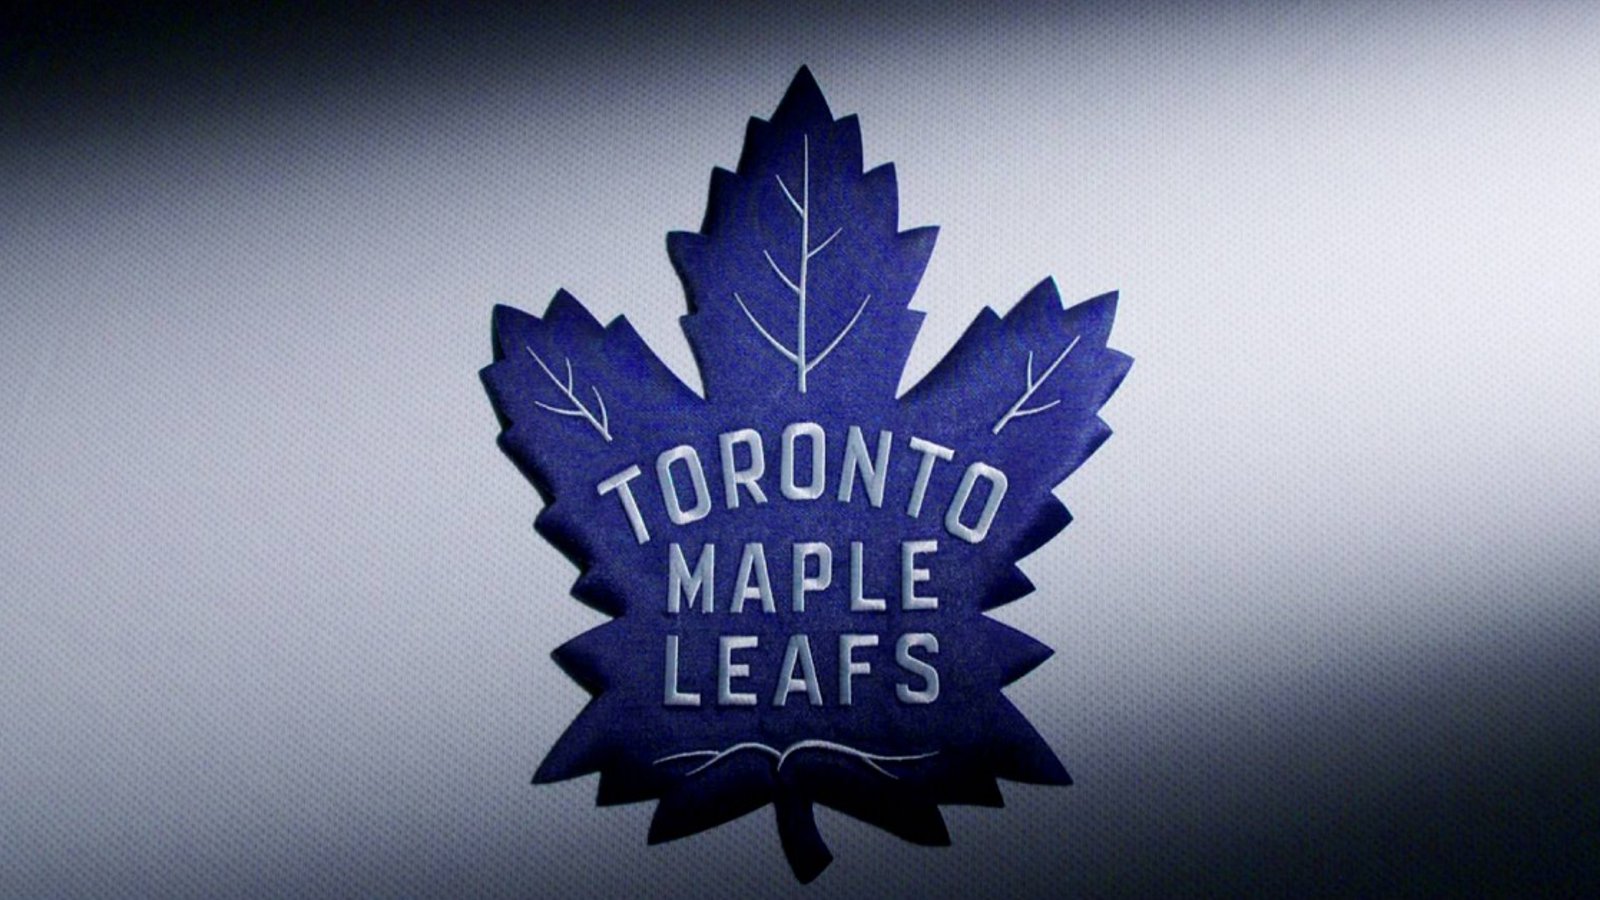 Yet another Maple Leaf earns “Rookie of the Month” honors.